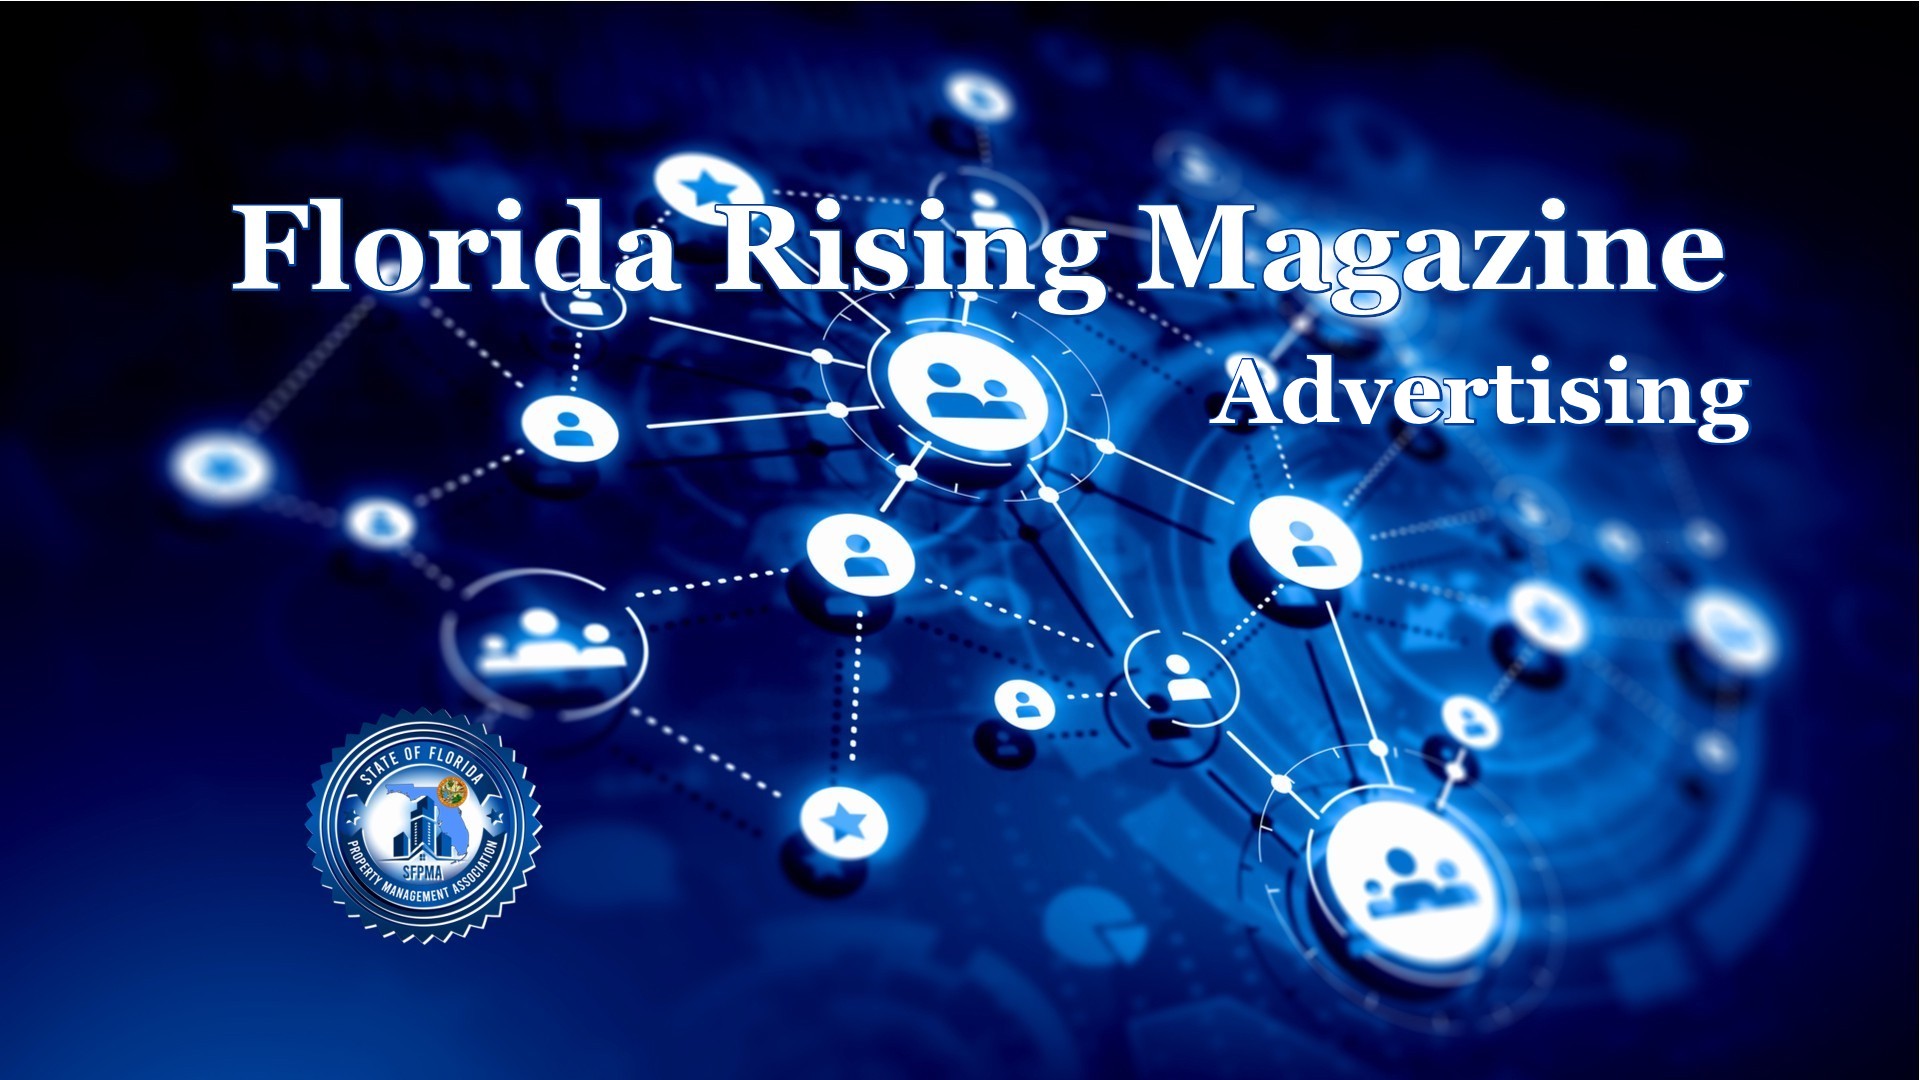 Today We signed a Contract to produce and manage: The FLORIDA RISING MAGAZINE with F & C